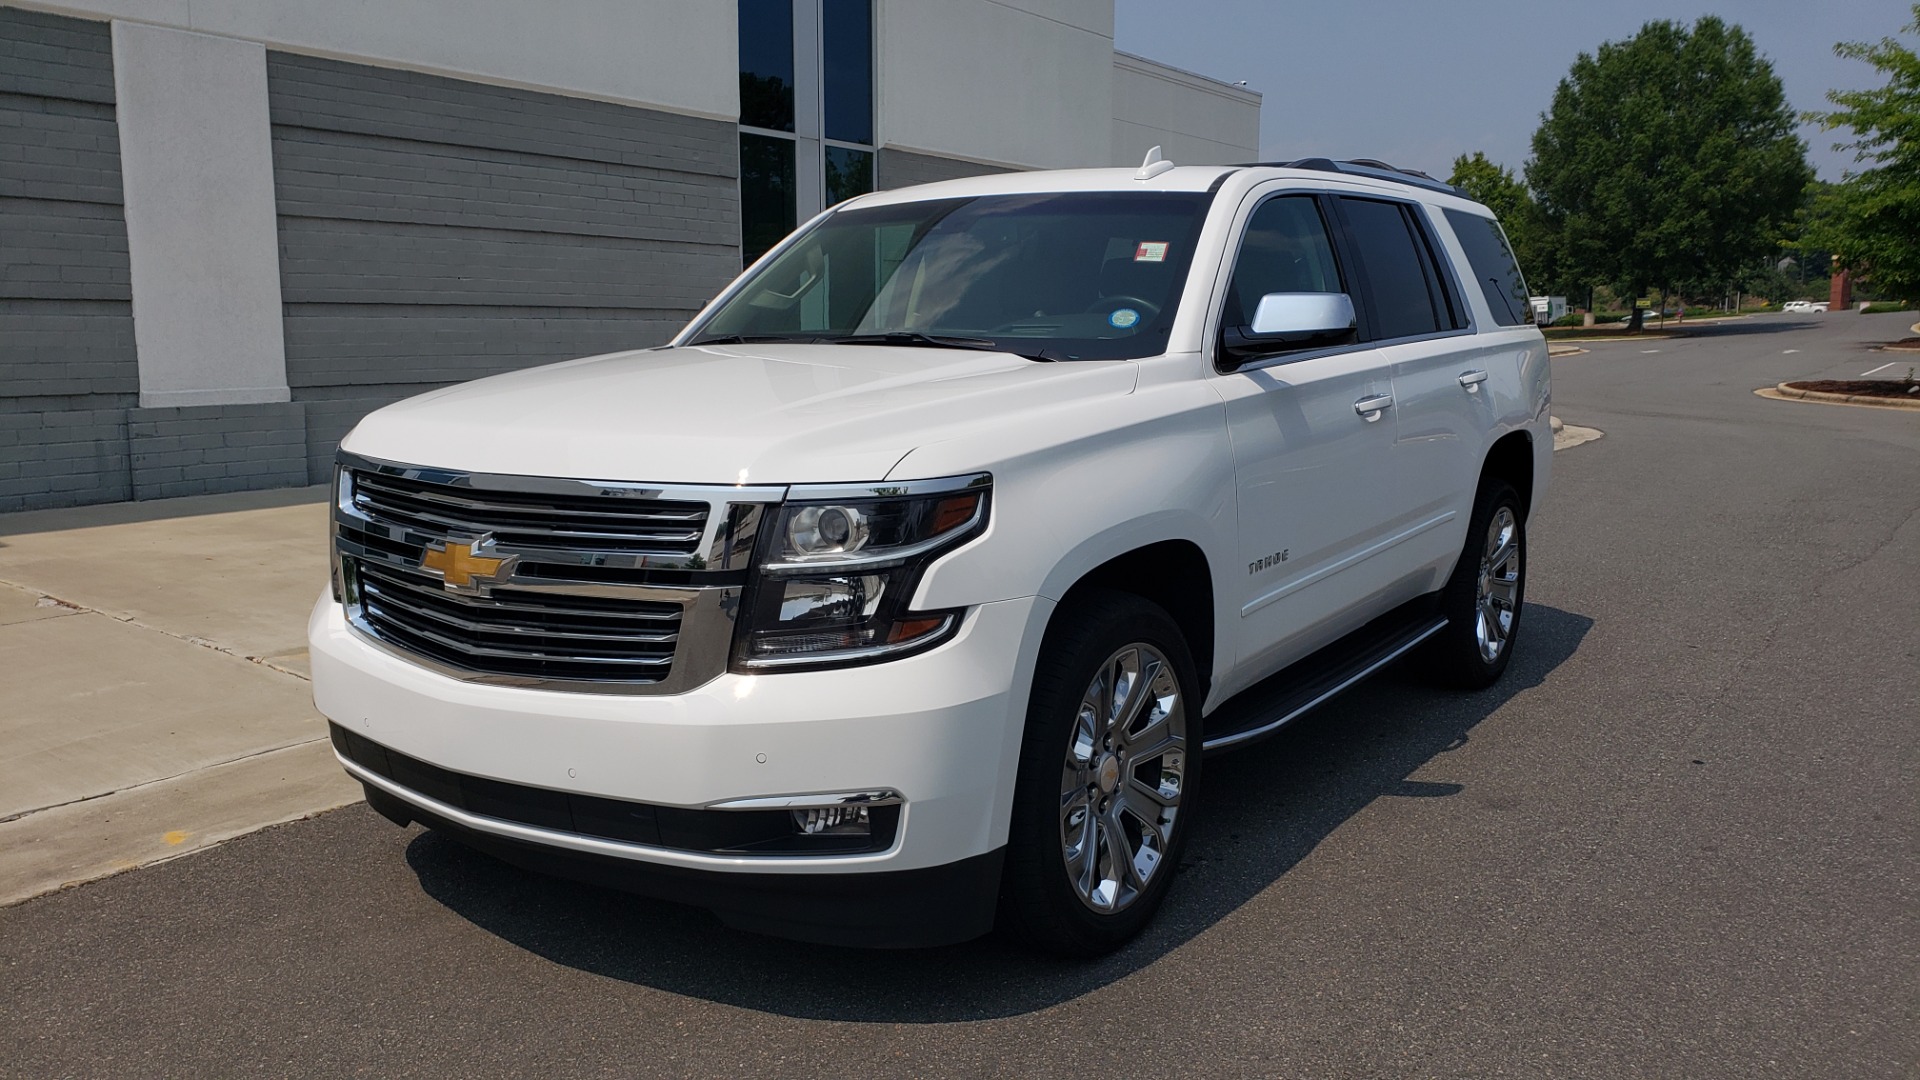 Used 2018 Chevrolet TAHOE PREMIER 4WD / NAV / SUNROOF / BOSE / 3-ROW / HUD / REARVIEW for sale Sold at Formula Imports in Charlotte NC 28227 3